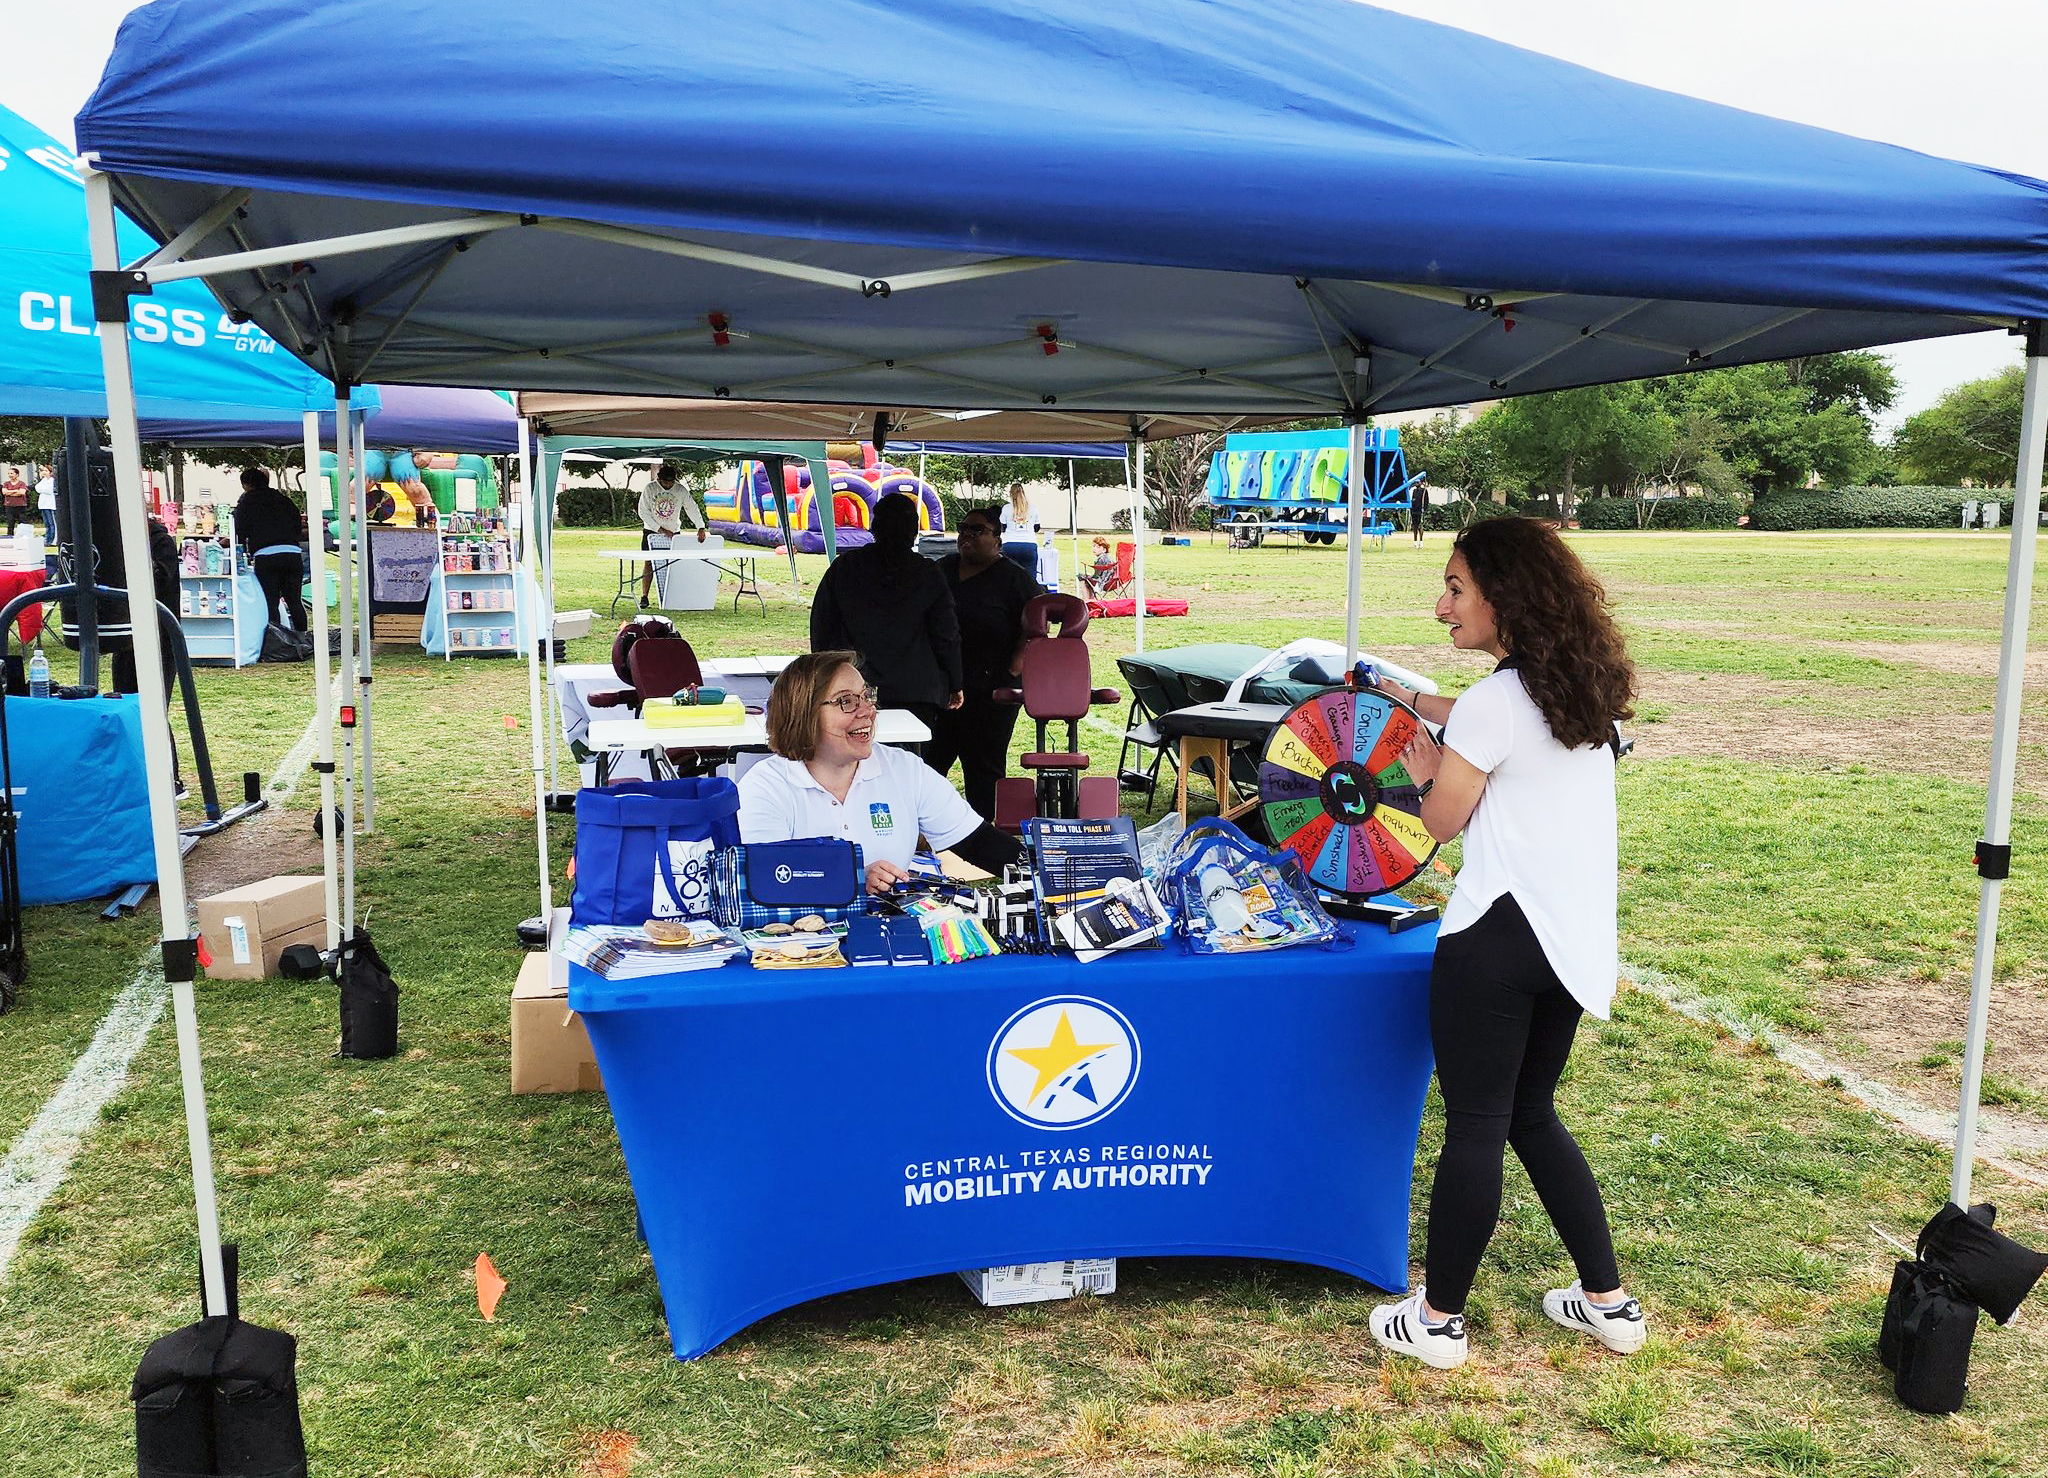 The 183 North and Mobility Authority teams at a table with branded promotional items.